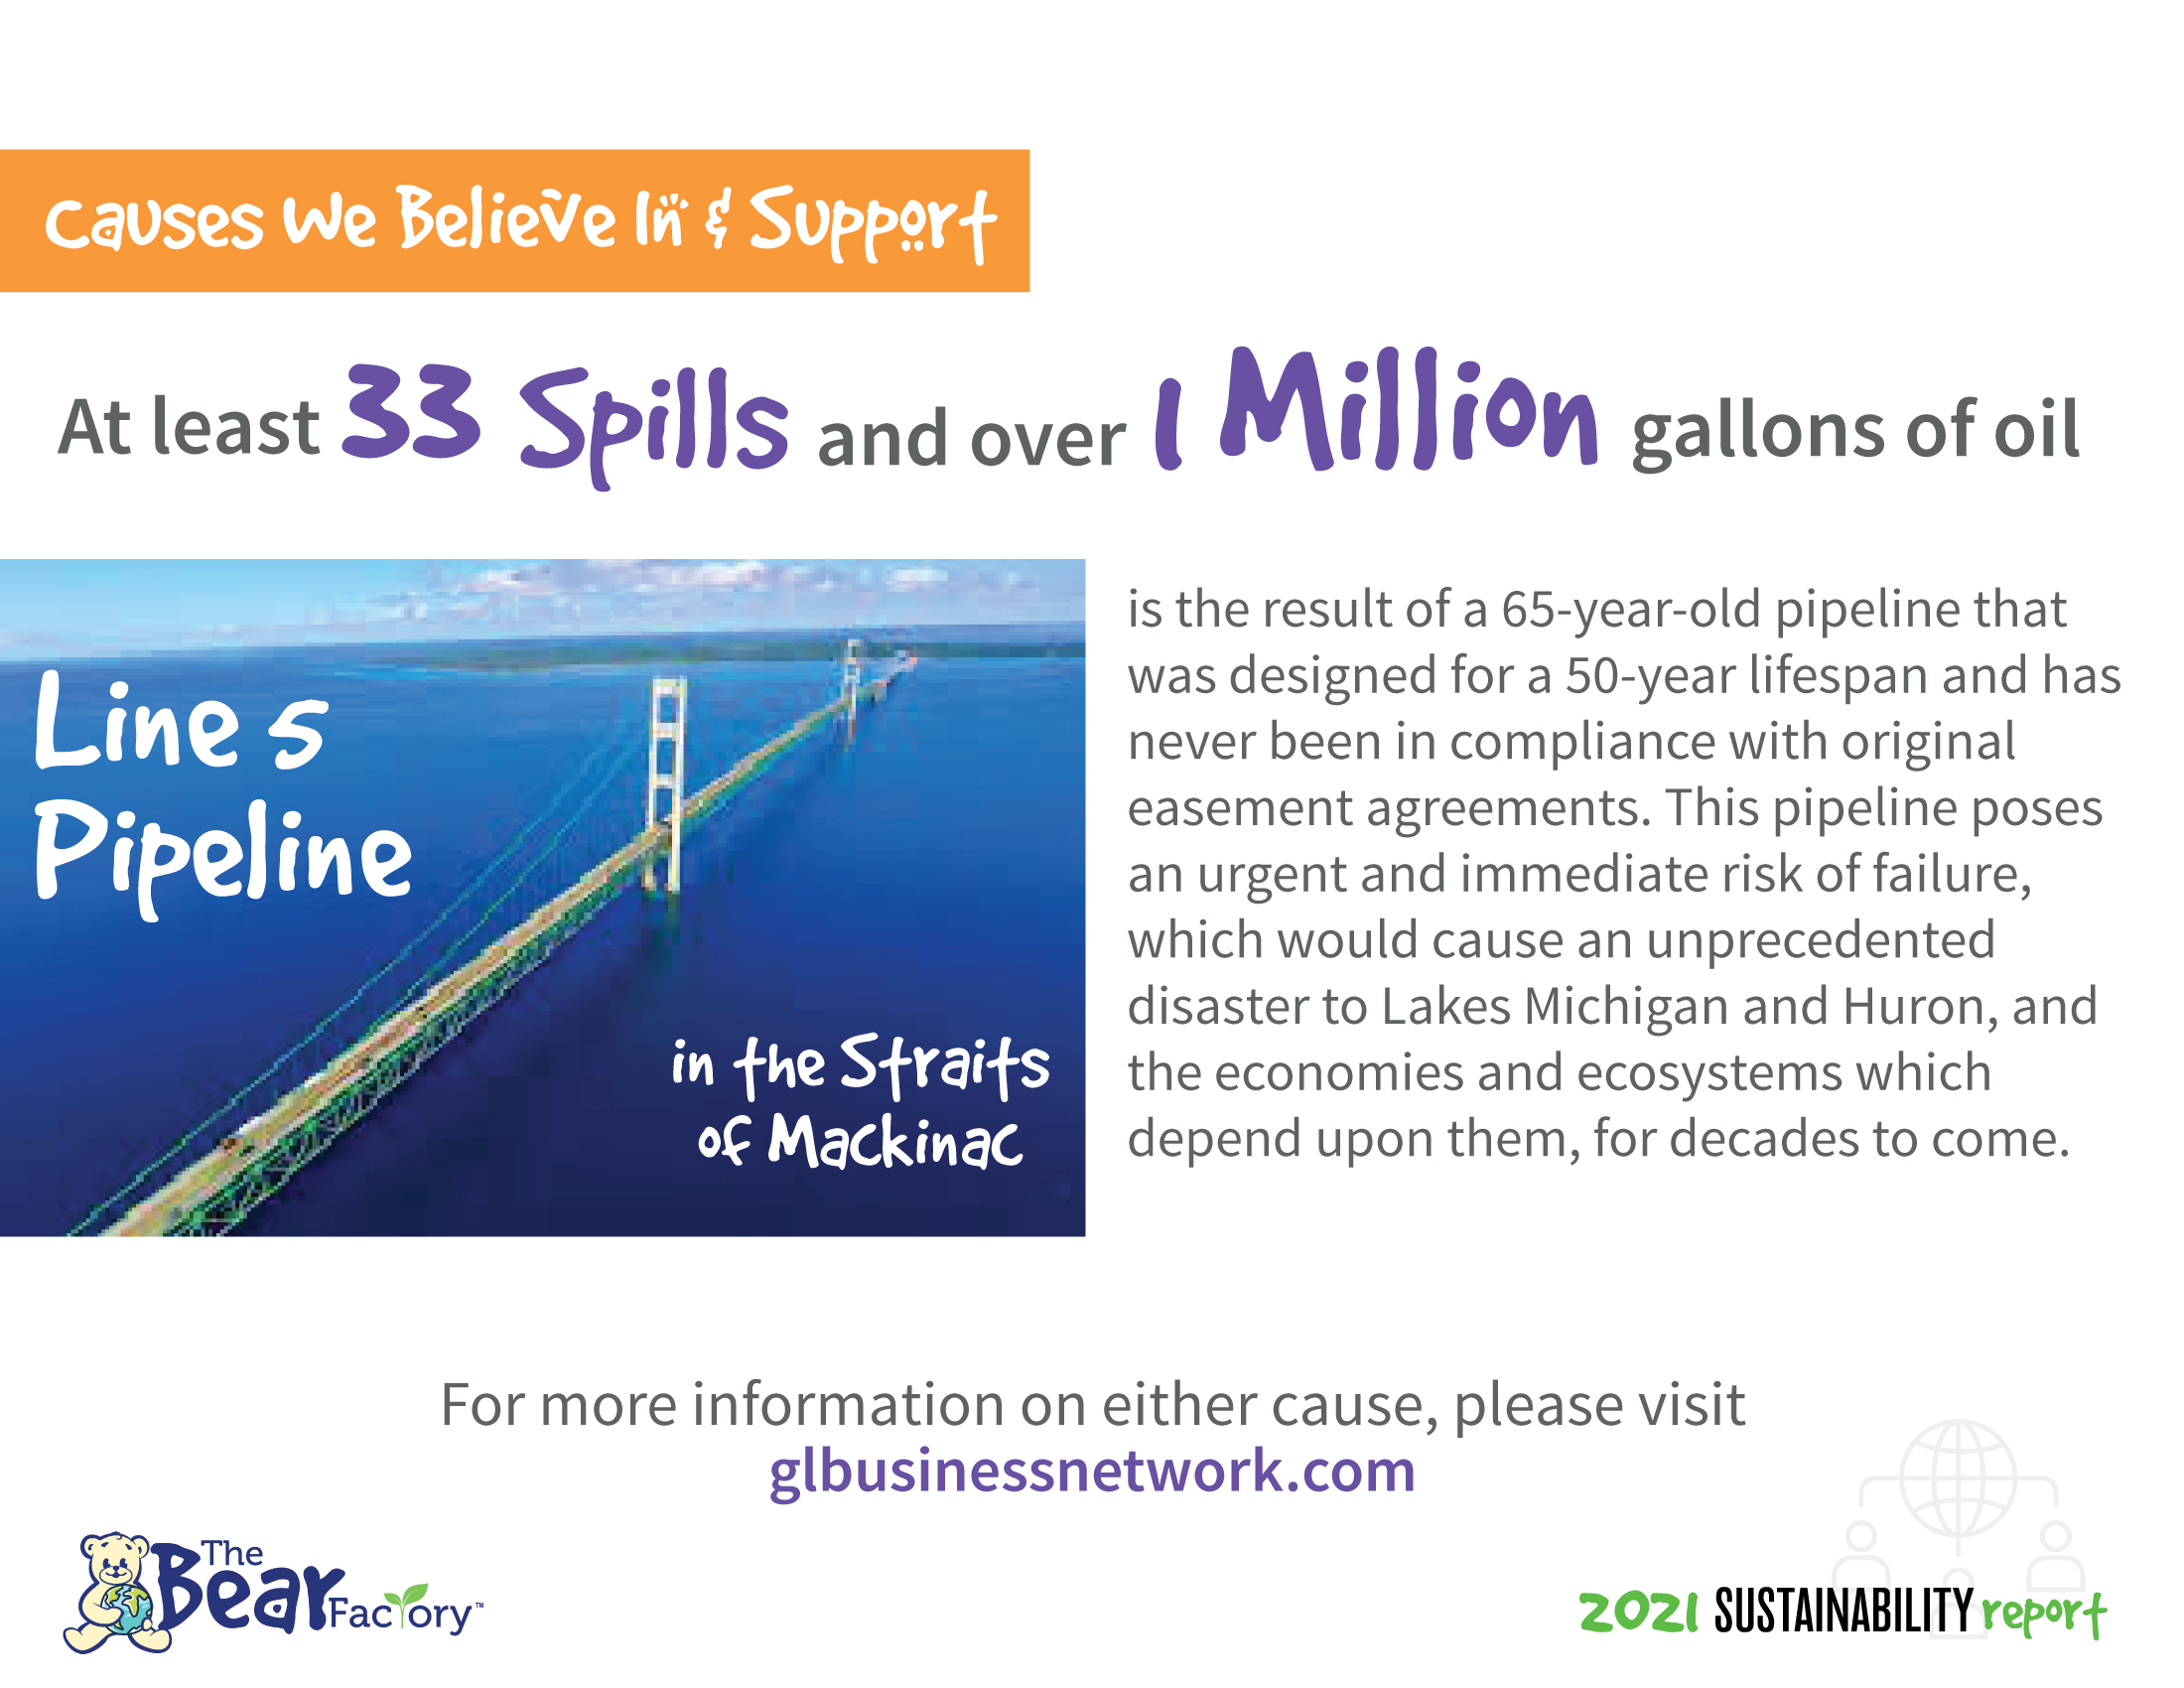 At least 33 Spills and over I Million gallons of oil is the result of a 65-year-old pipeline that was designed for a 50-year lifespan and has never been in compliance with original easement agreements. This pipeline poses an urgent and immediate risk of failure, which would cause an unprecedented disaster to Lakes Michigan and Huron, and the economies and ecosystems which depend upon them, for decades to come. For more information on either cause, please visit glusinessnetwork.com